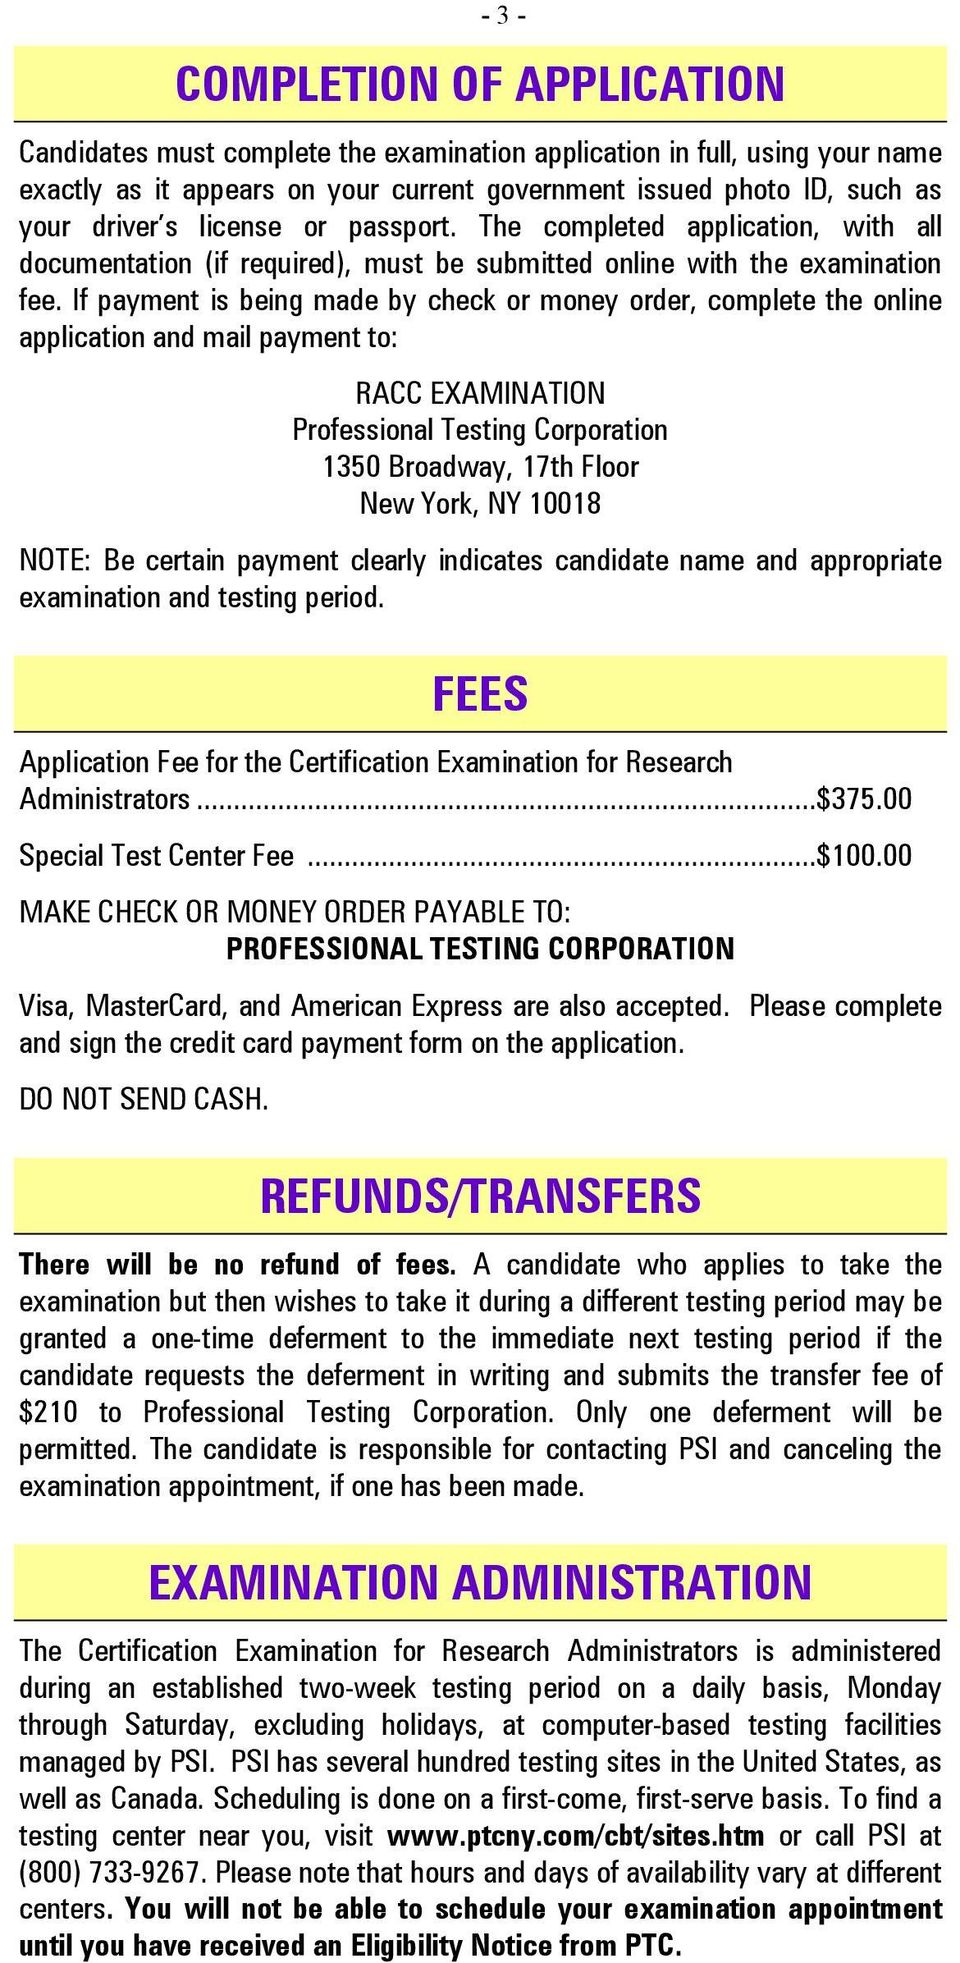 If payment is being made by check or money order, complete the online application and mail payment to: RACC EXAMINATION Professional Testing Corporation 1350 Broadway, 17th Floor New York, NY 10018